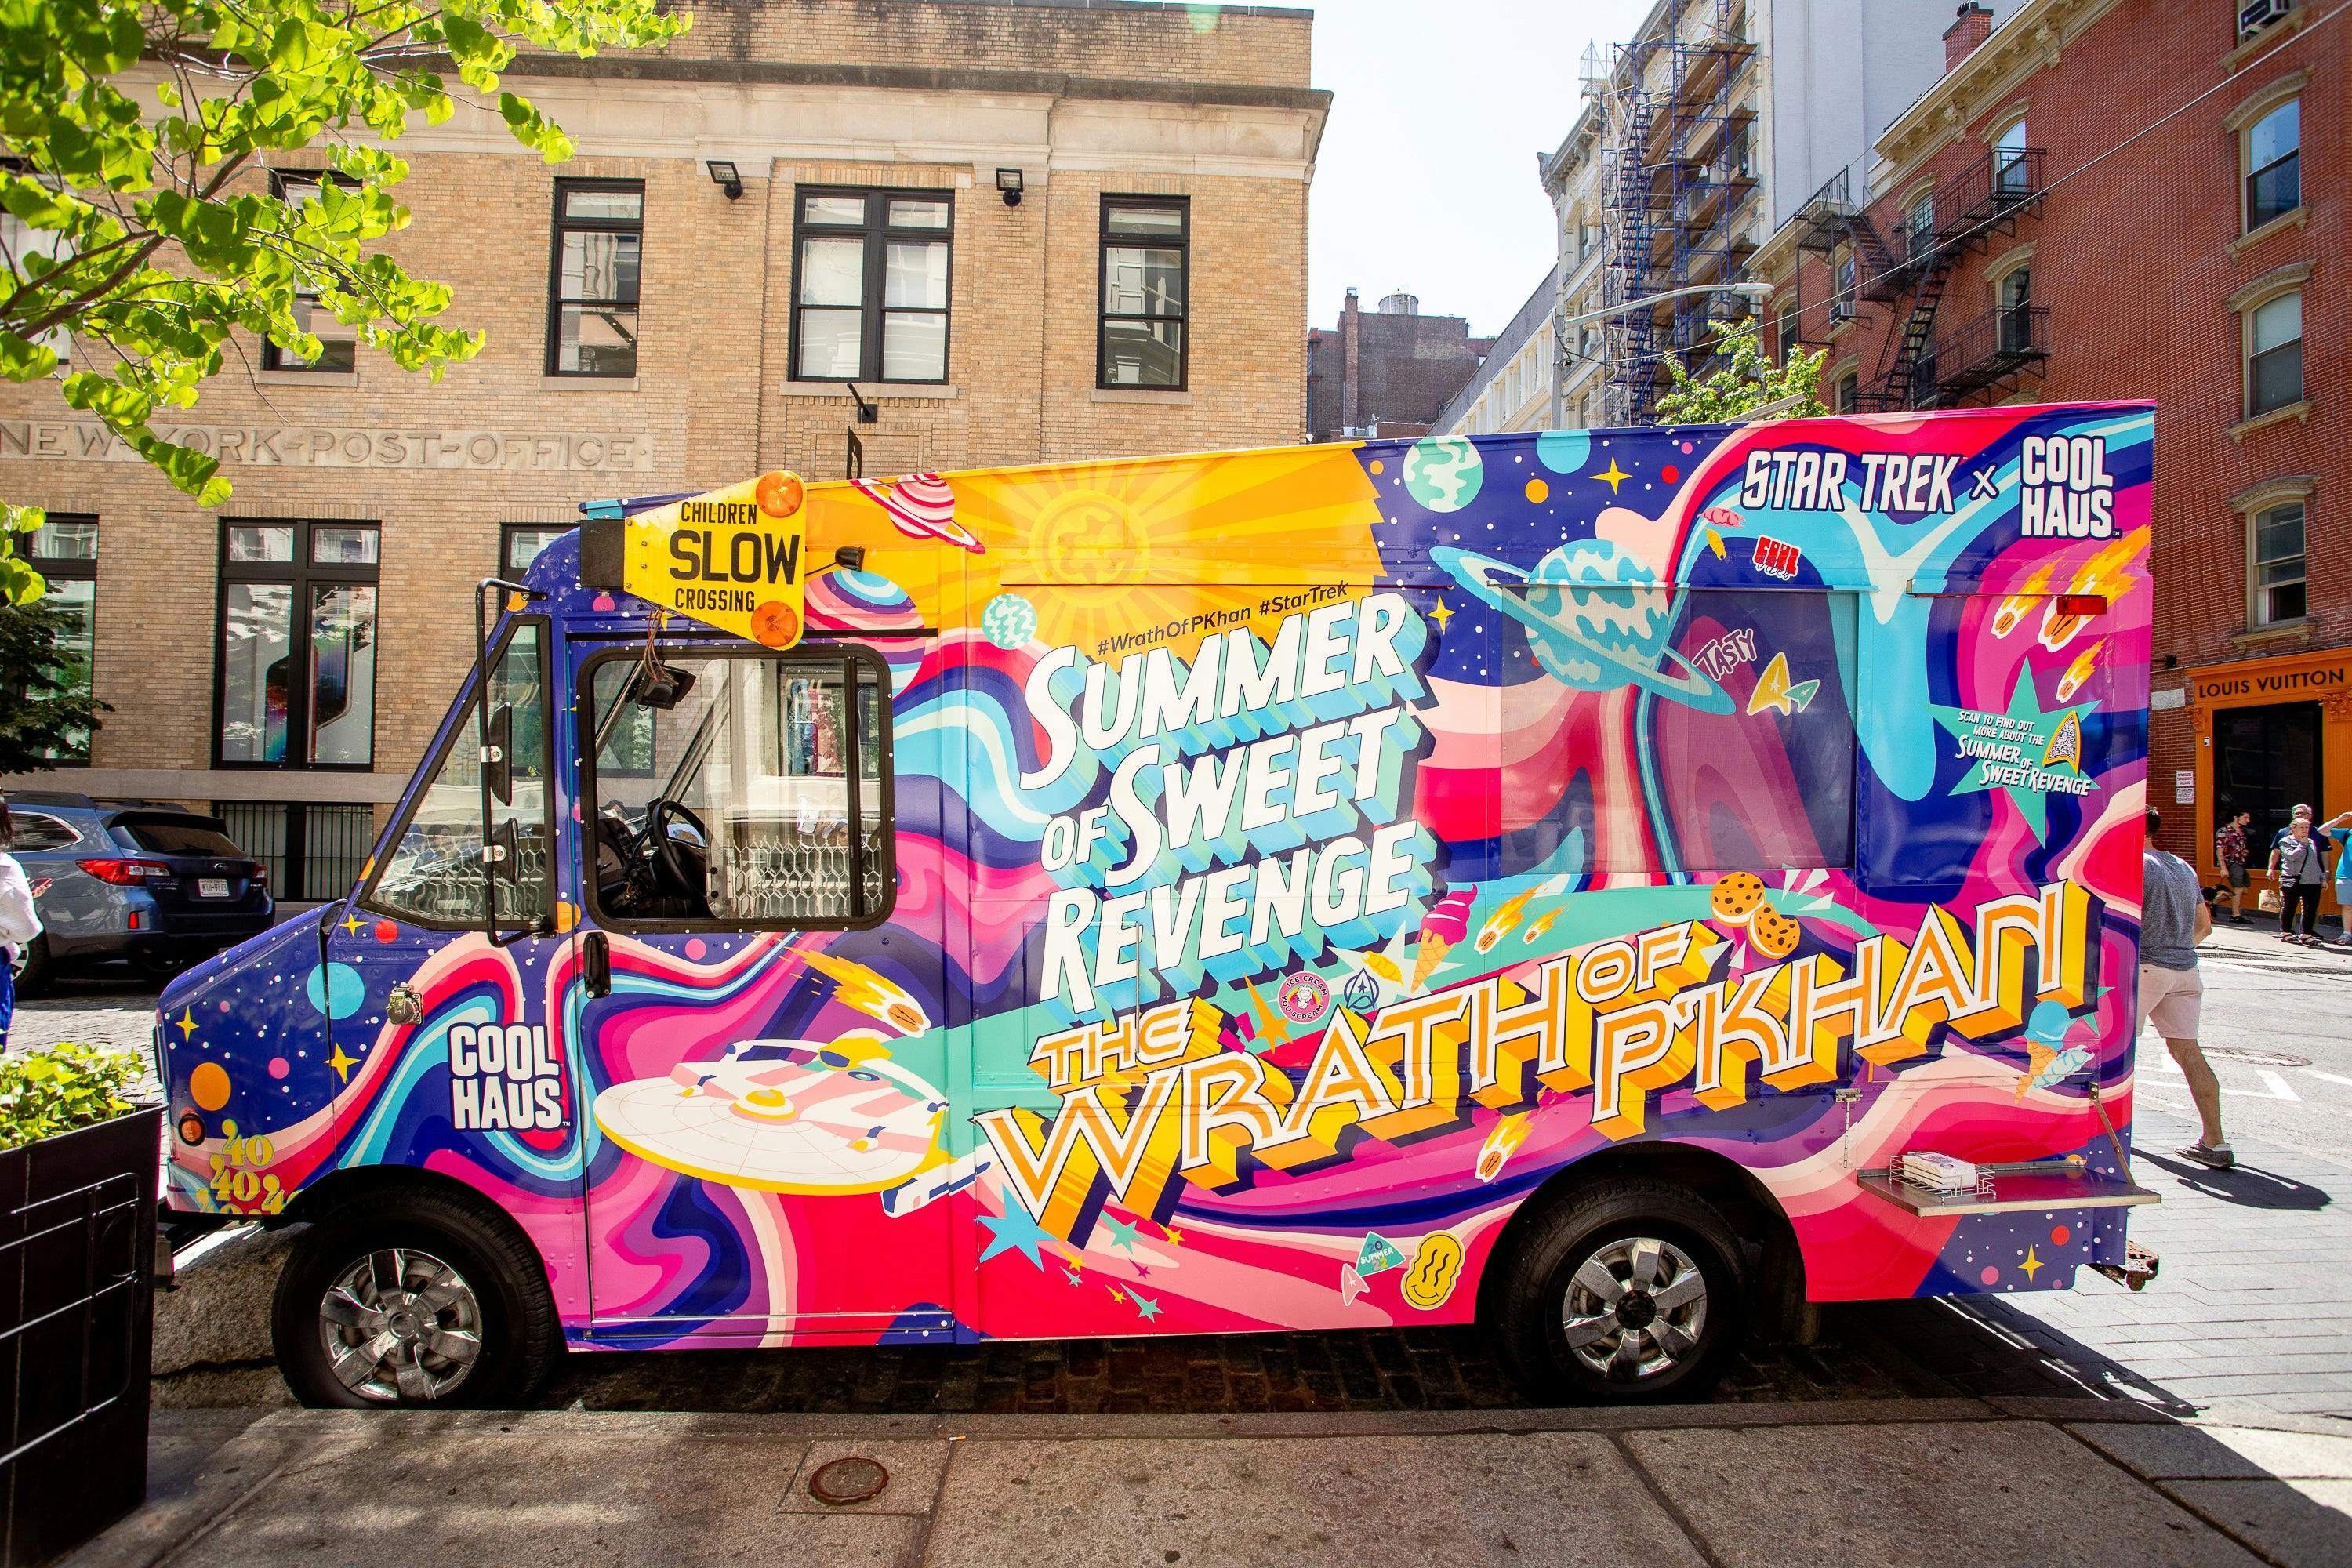 The truck is parked along a street. You can see "The Summer of Sweet Revenge" and "The Wrath of P'Khan" written on it in bright colors against a psychedelic background